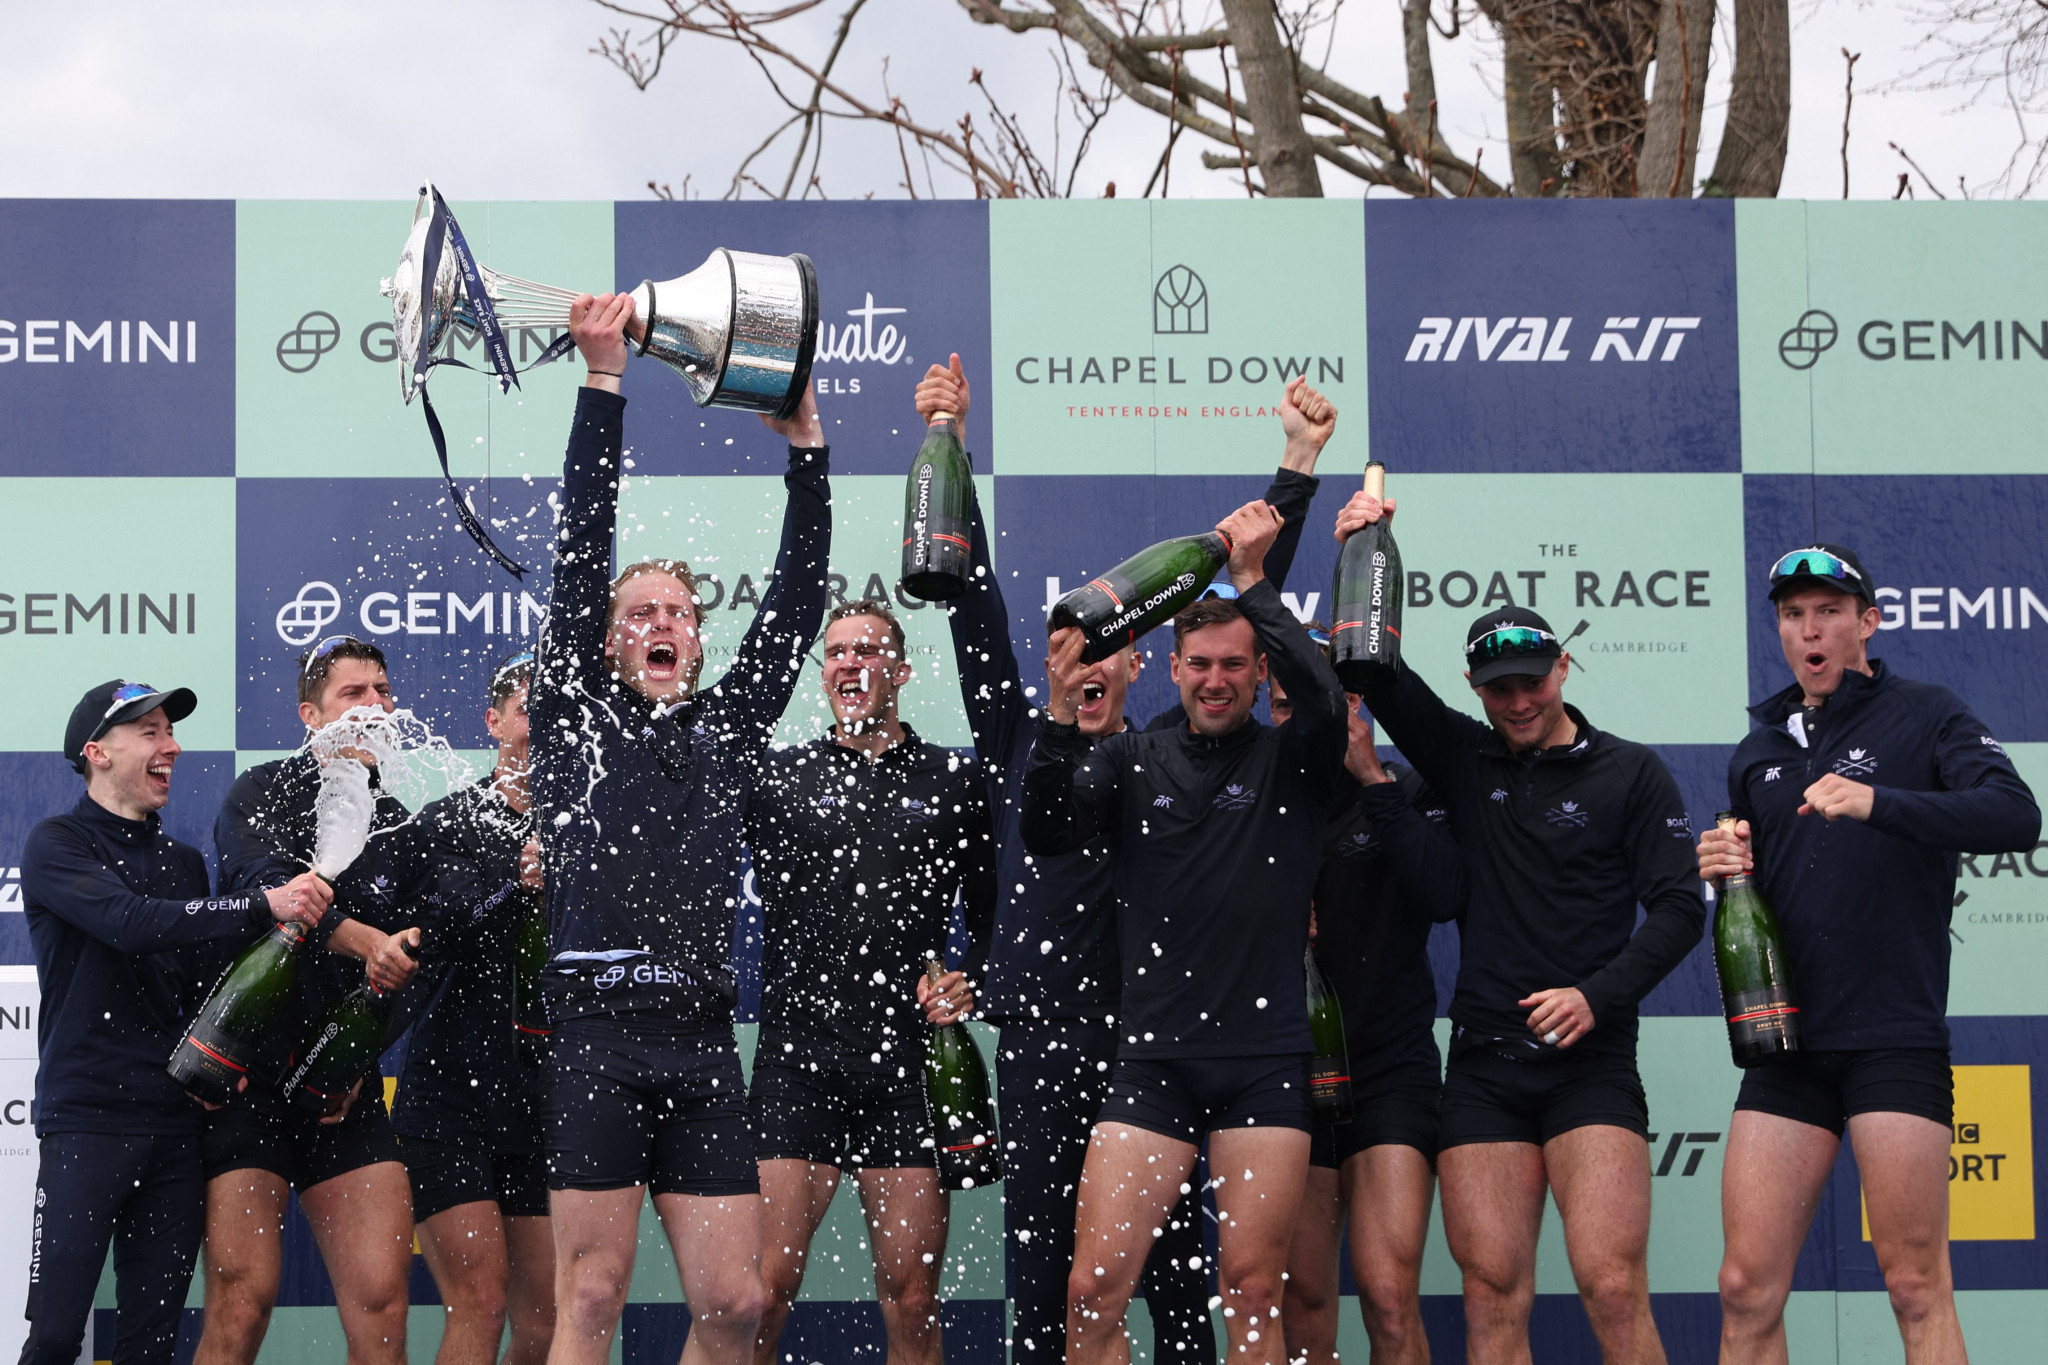 Oxford celebrate with the trophy during the podium ceremony after winning the 167th annual men's University Boat Race against Cambridge University ©Getty Images